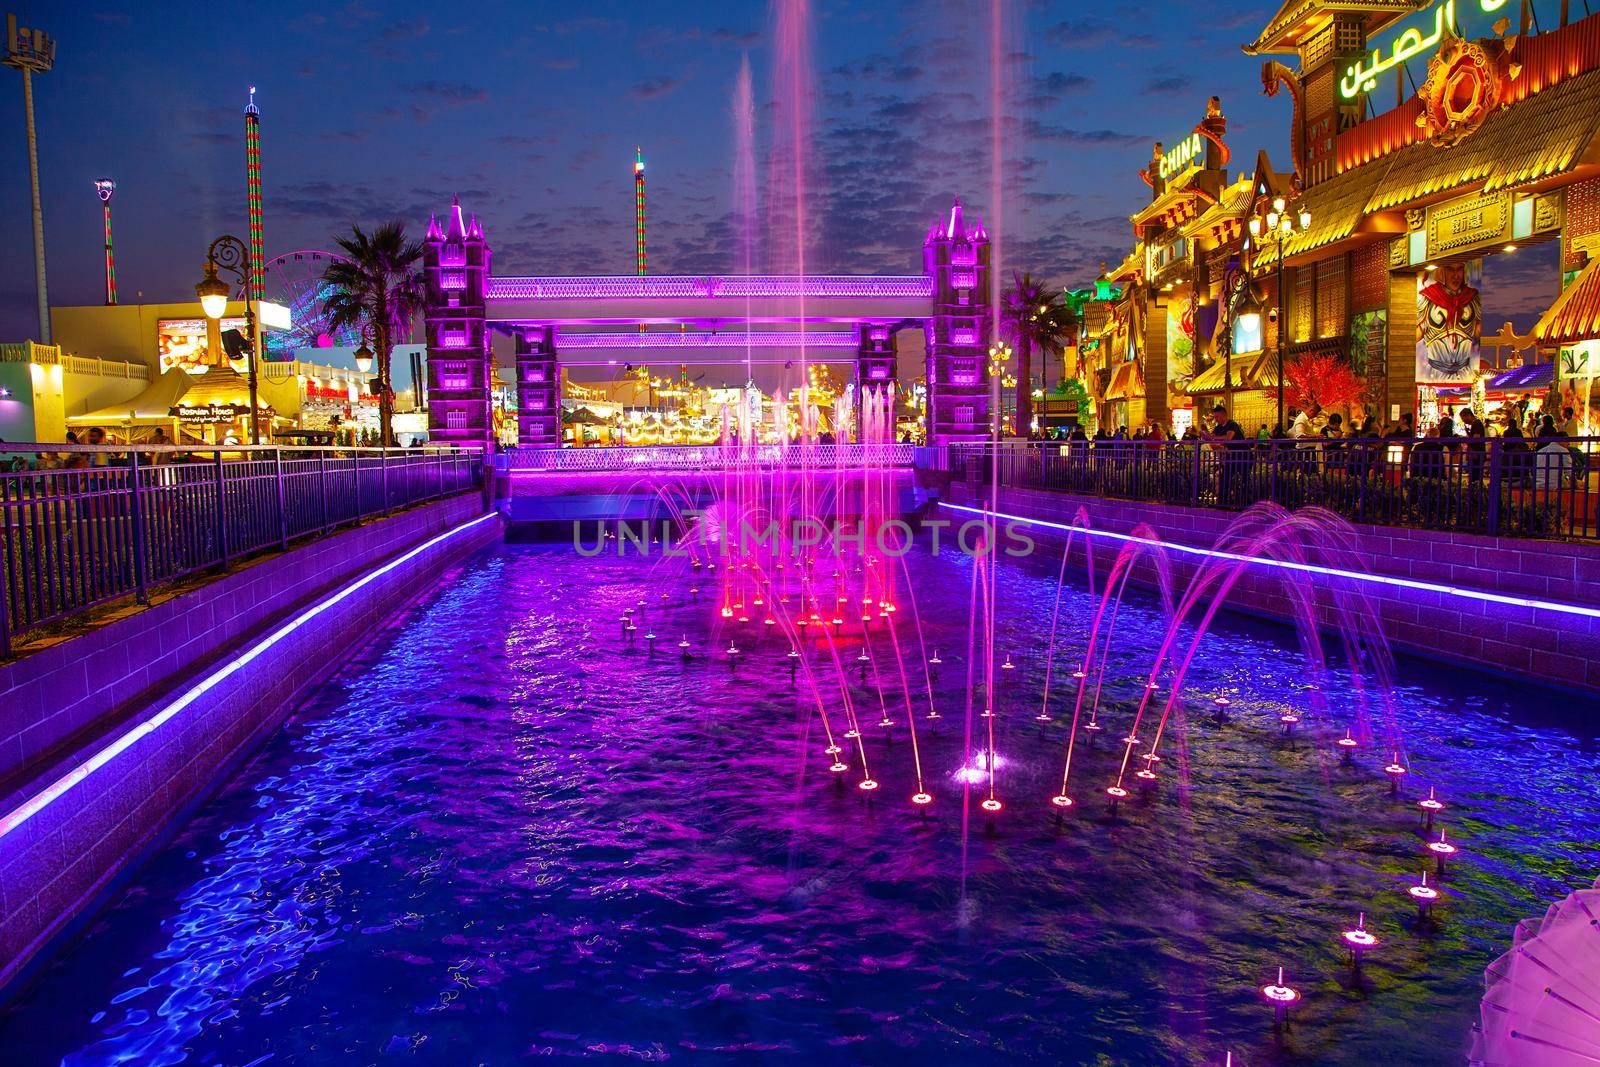 Dubai Global Village Night Lights and water view by kisika